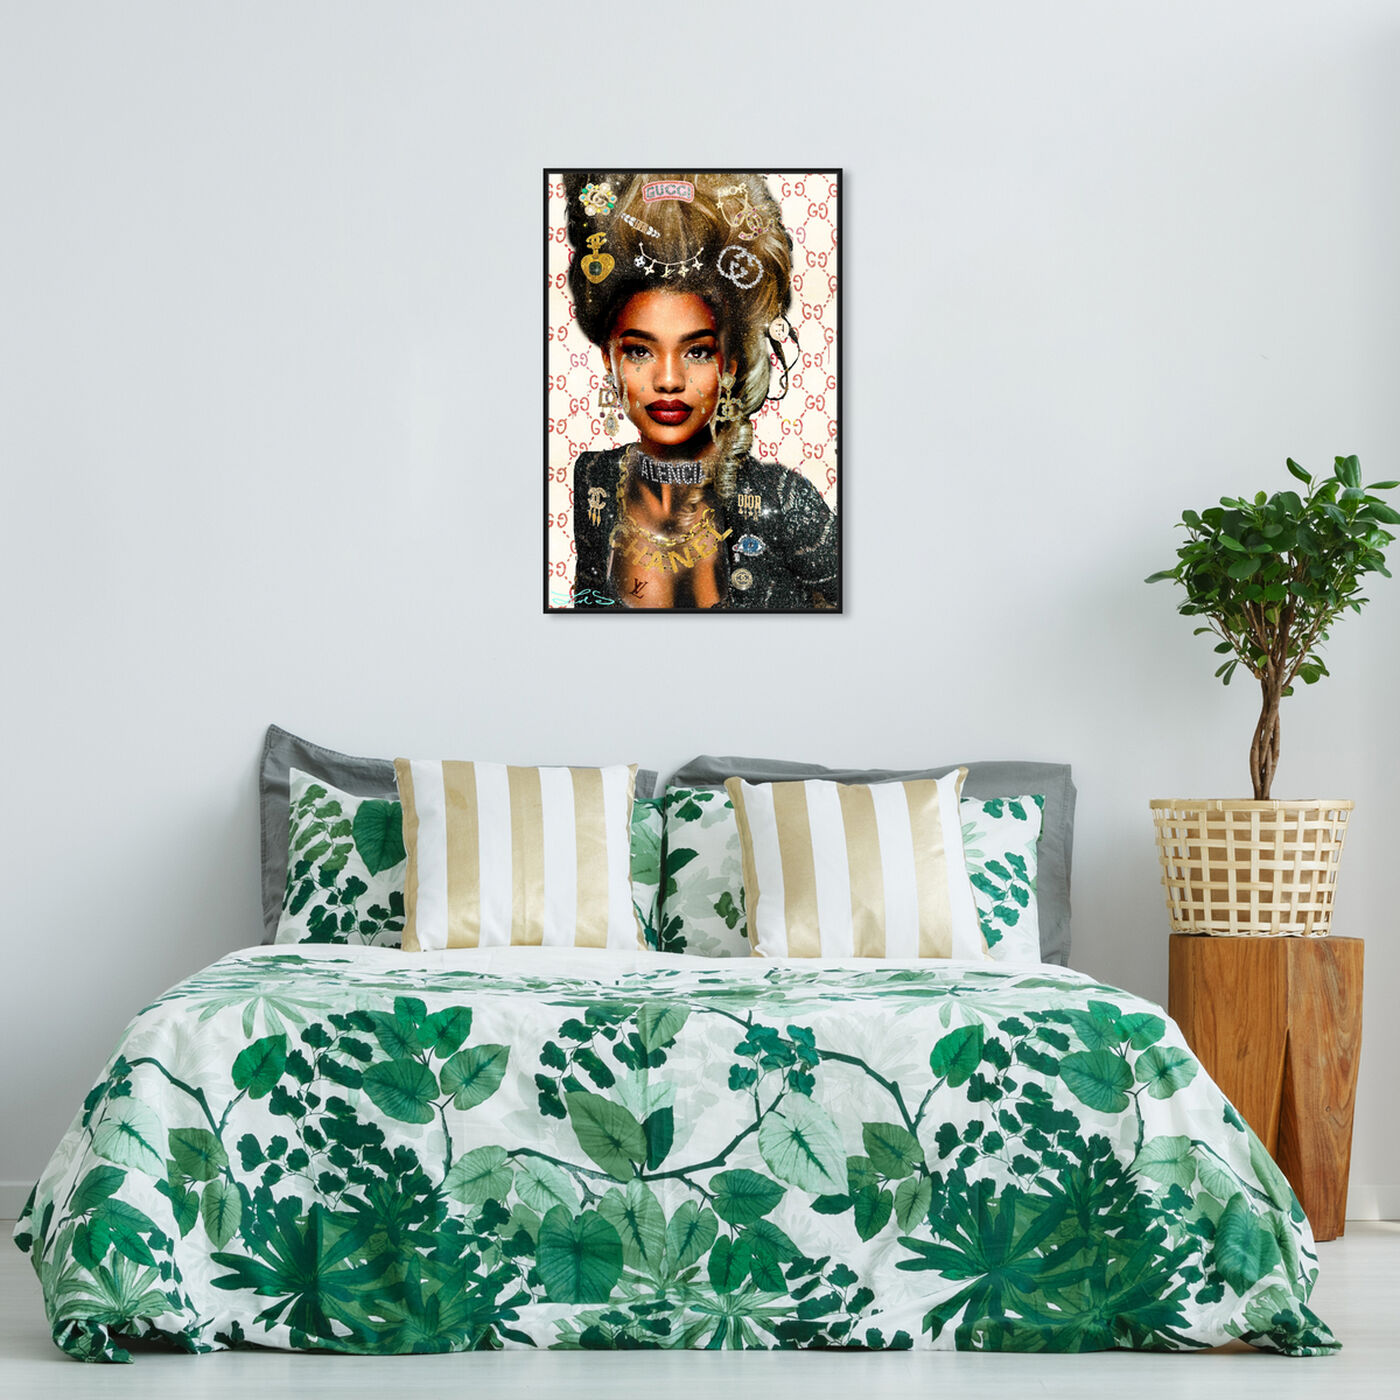 Hanging view of Real Queen of Everything featuring fashion and glam and fashion lifestyle art.